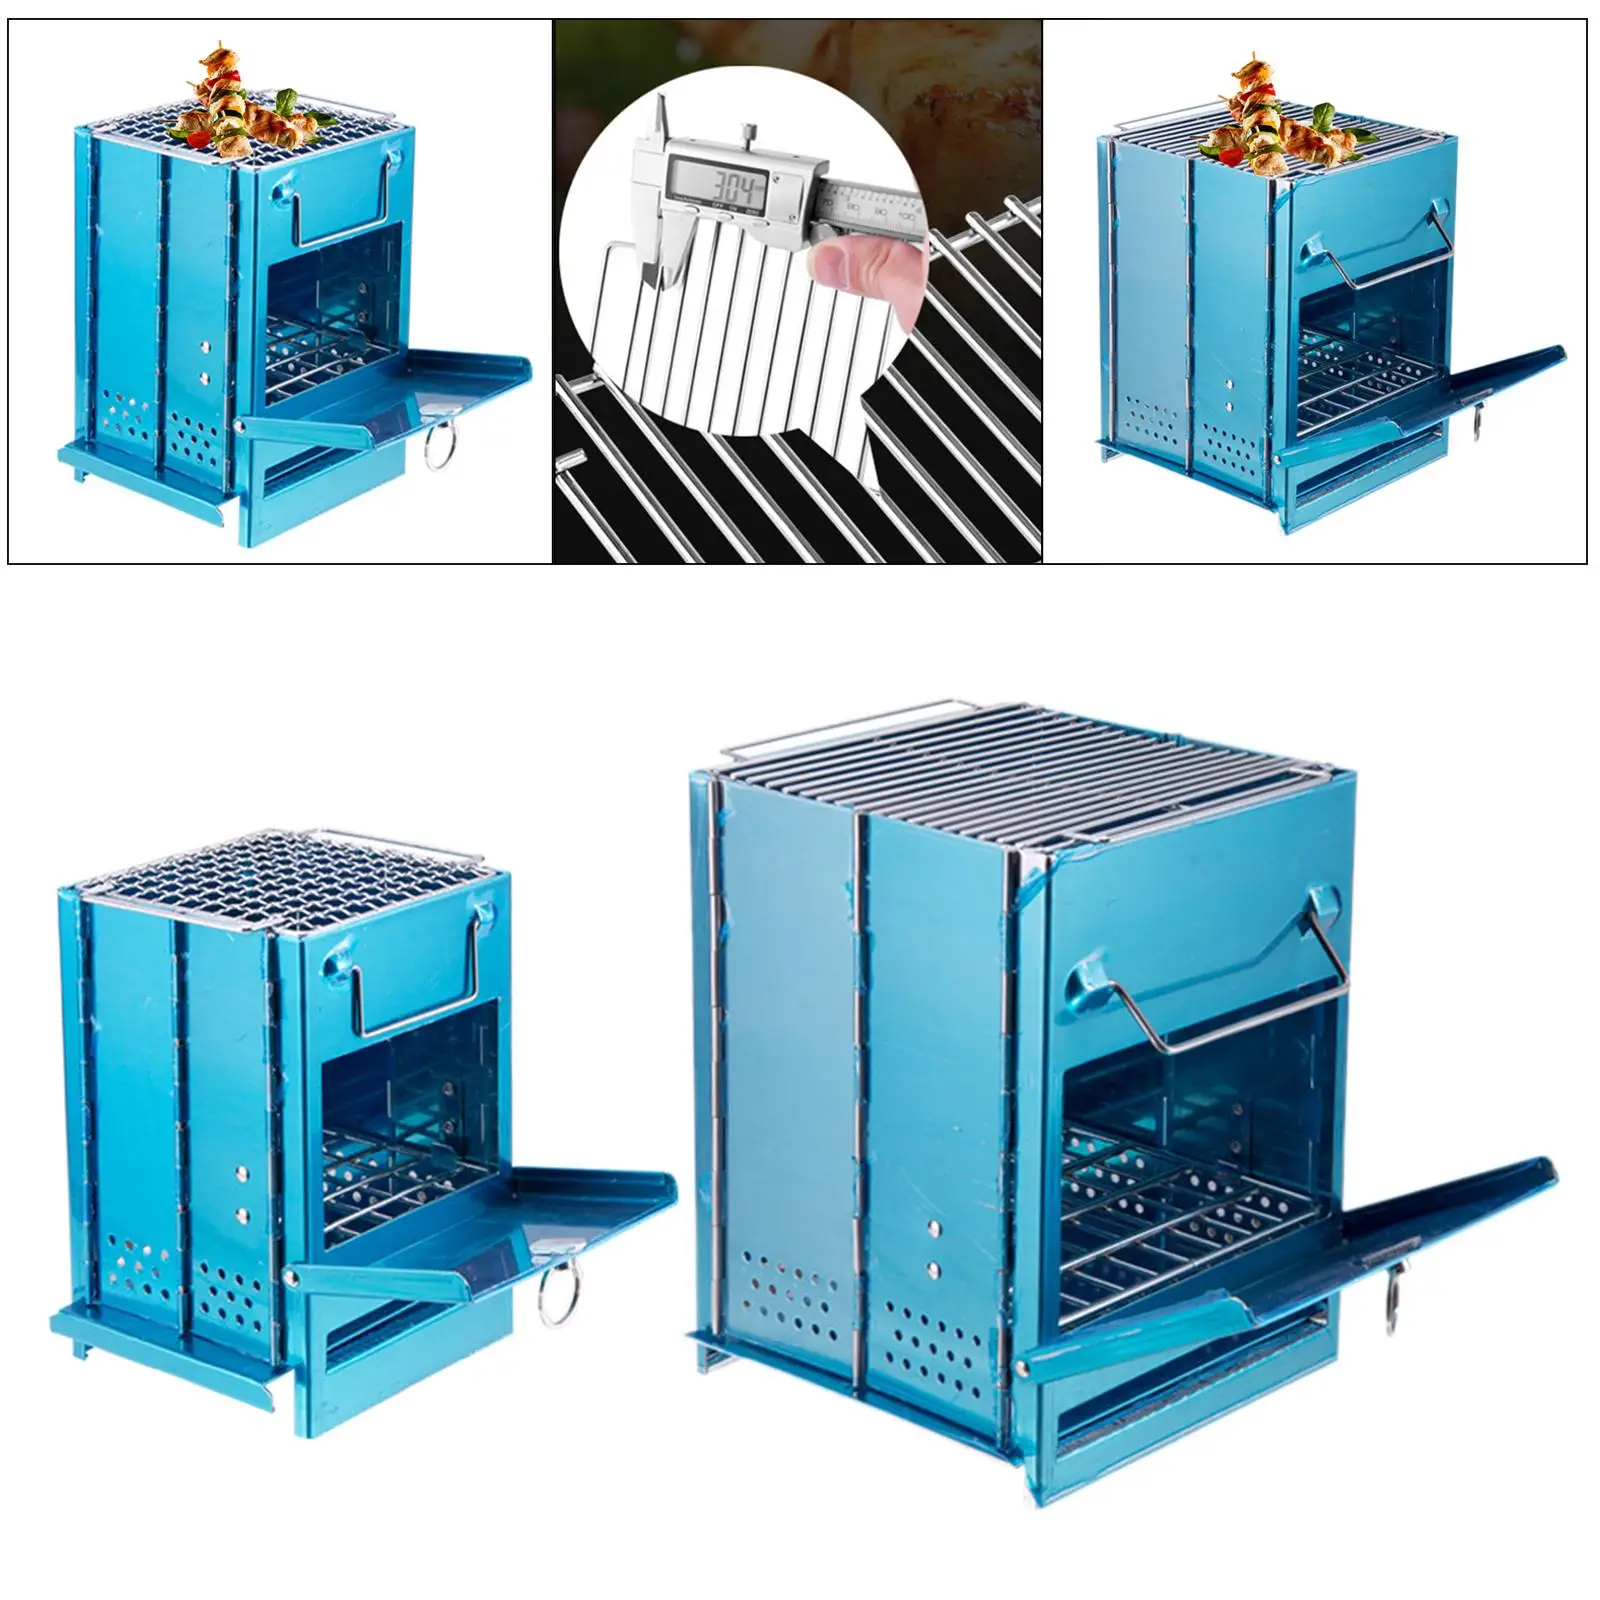 Stainless Steel Square Wood Stove Foldable Grill Outdoor Travel Charcoal Stove Portable Hiking Camping BBQ Picnic Stove